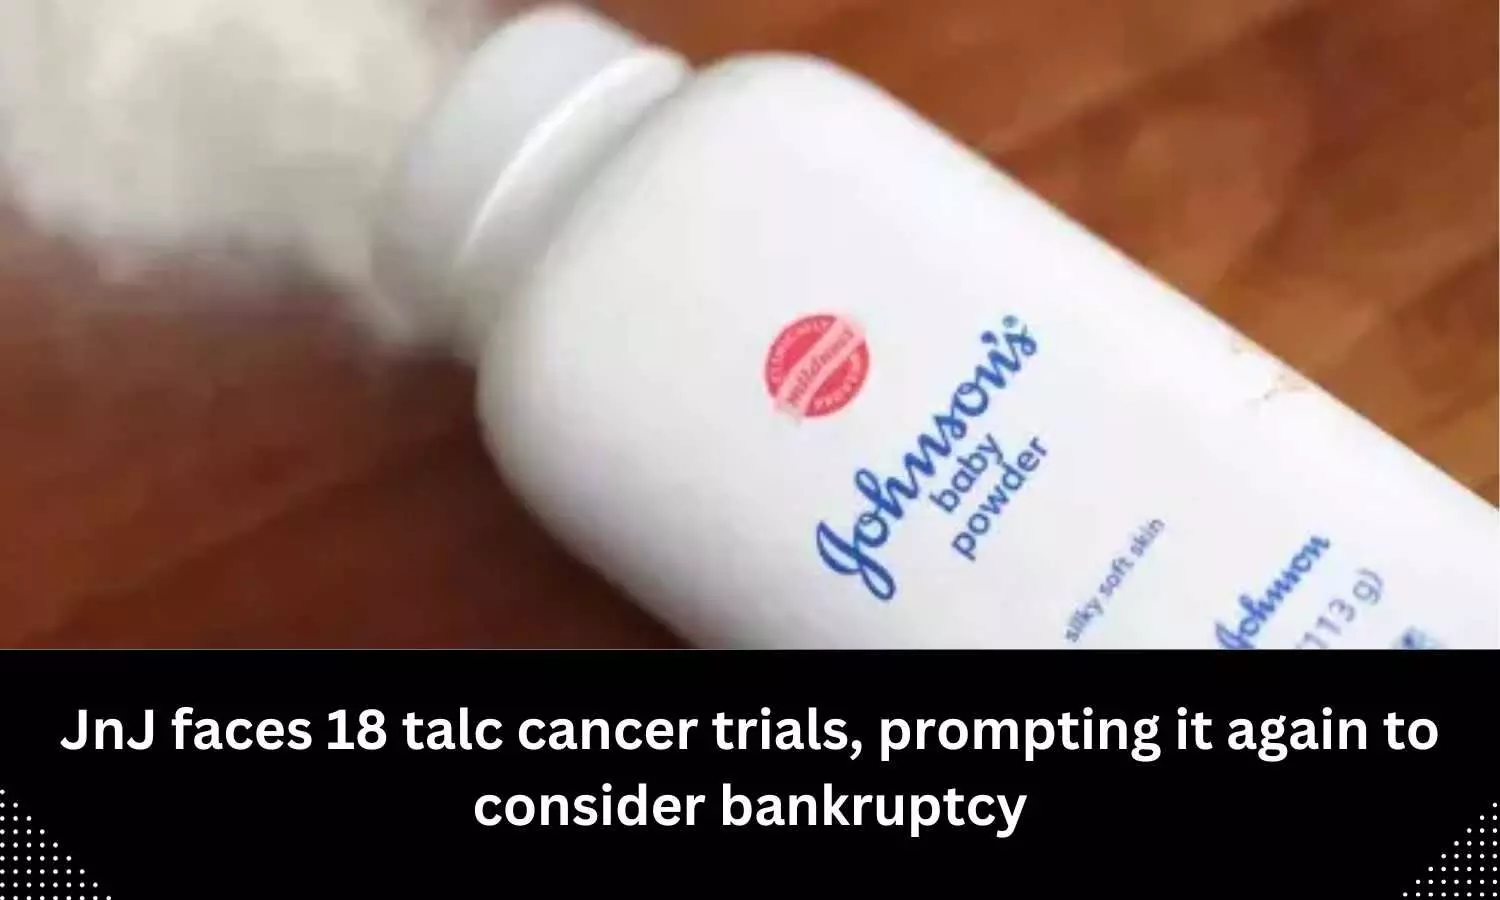 Johnson and Johnson faces 18 talc cancer trials, prompting it again to consider bankruptcy